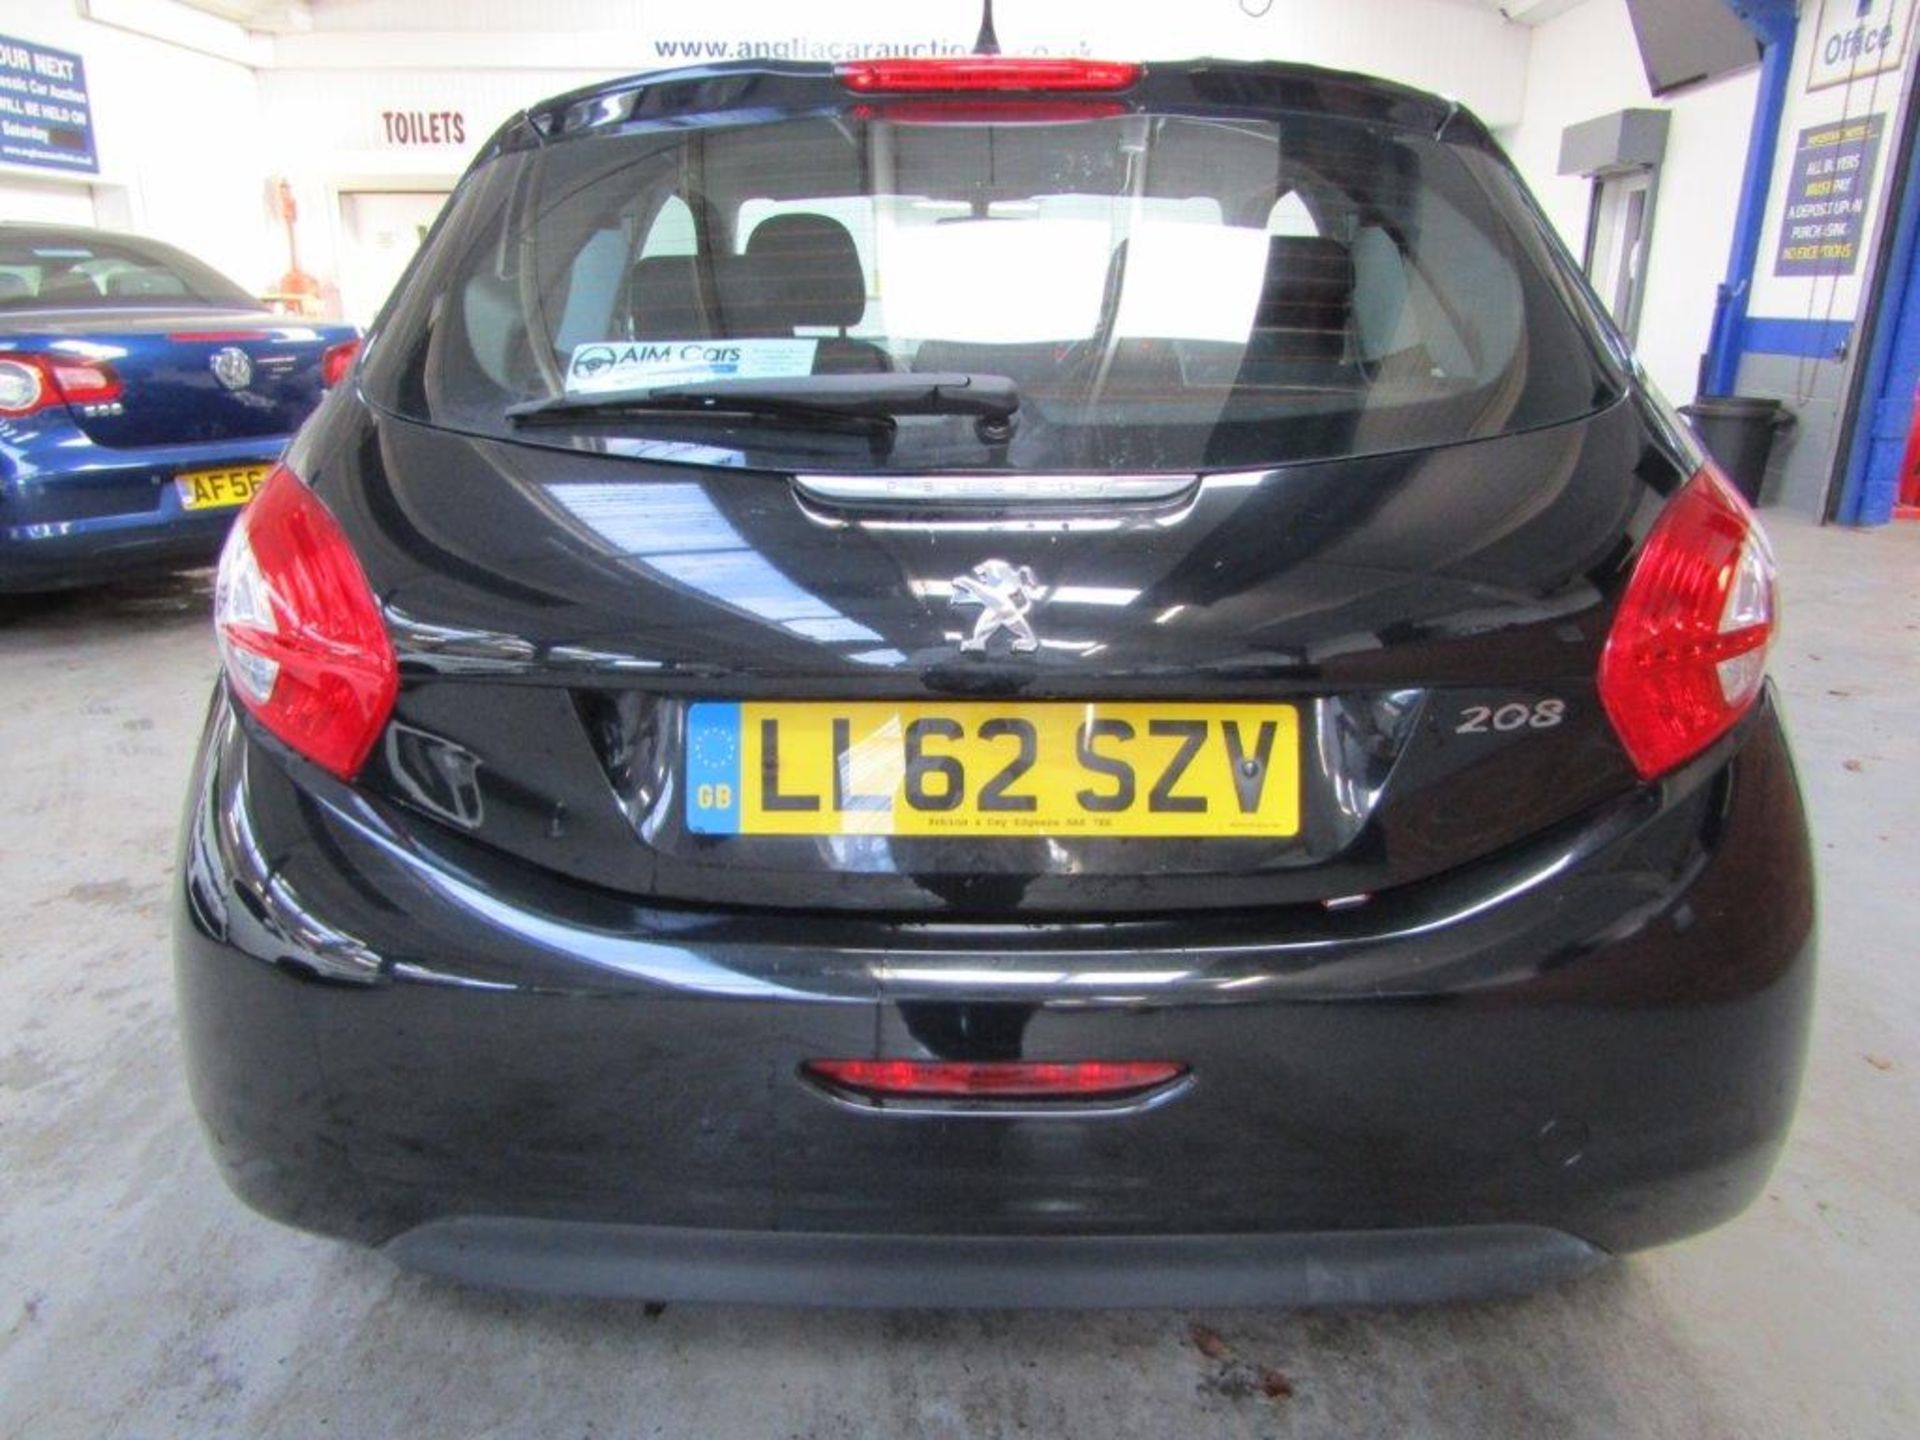 62 12 Peugeot 208 Active - Image 3 of 22